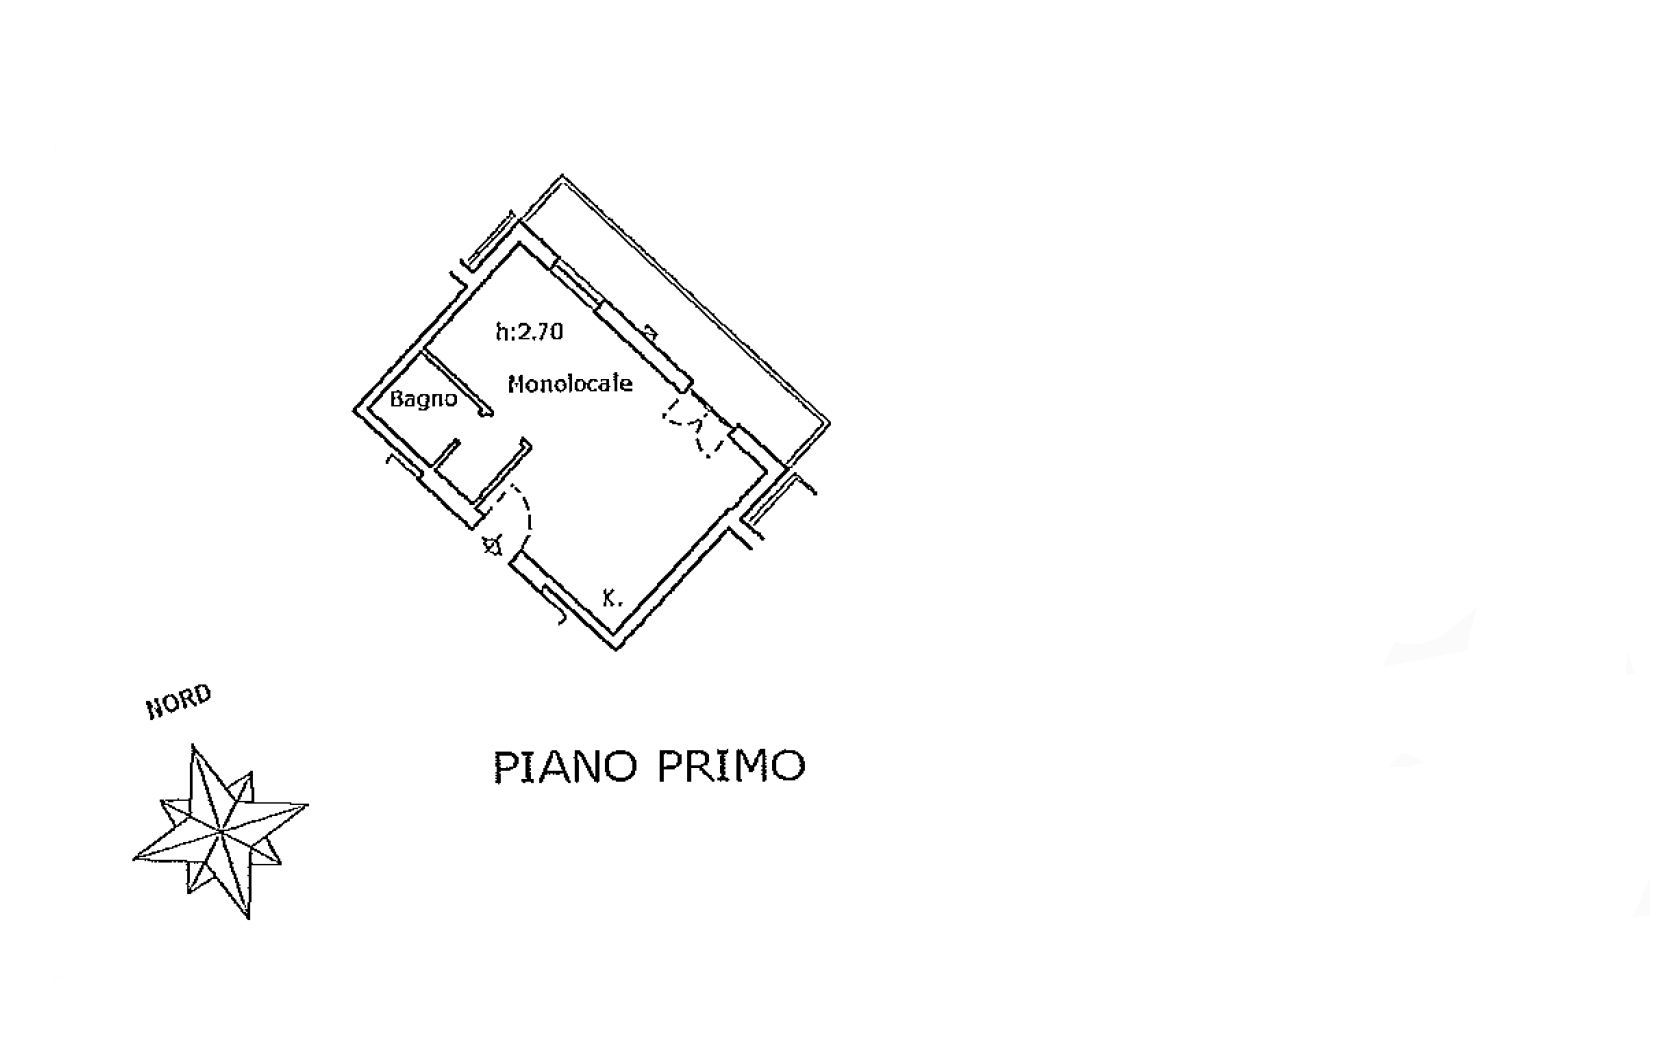 Apartment for sale, ref. R/662 (Plan 1/1)